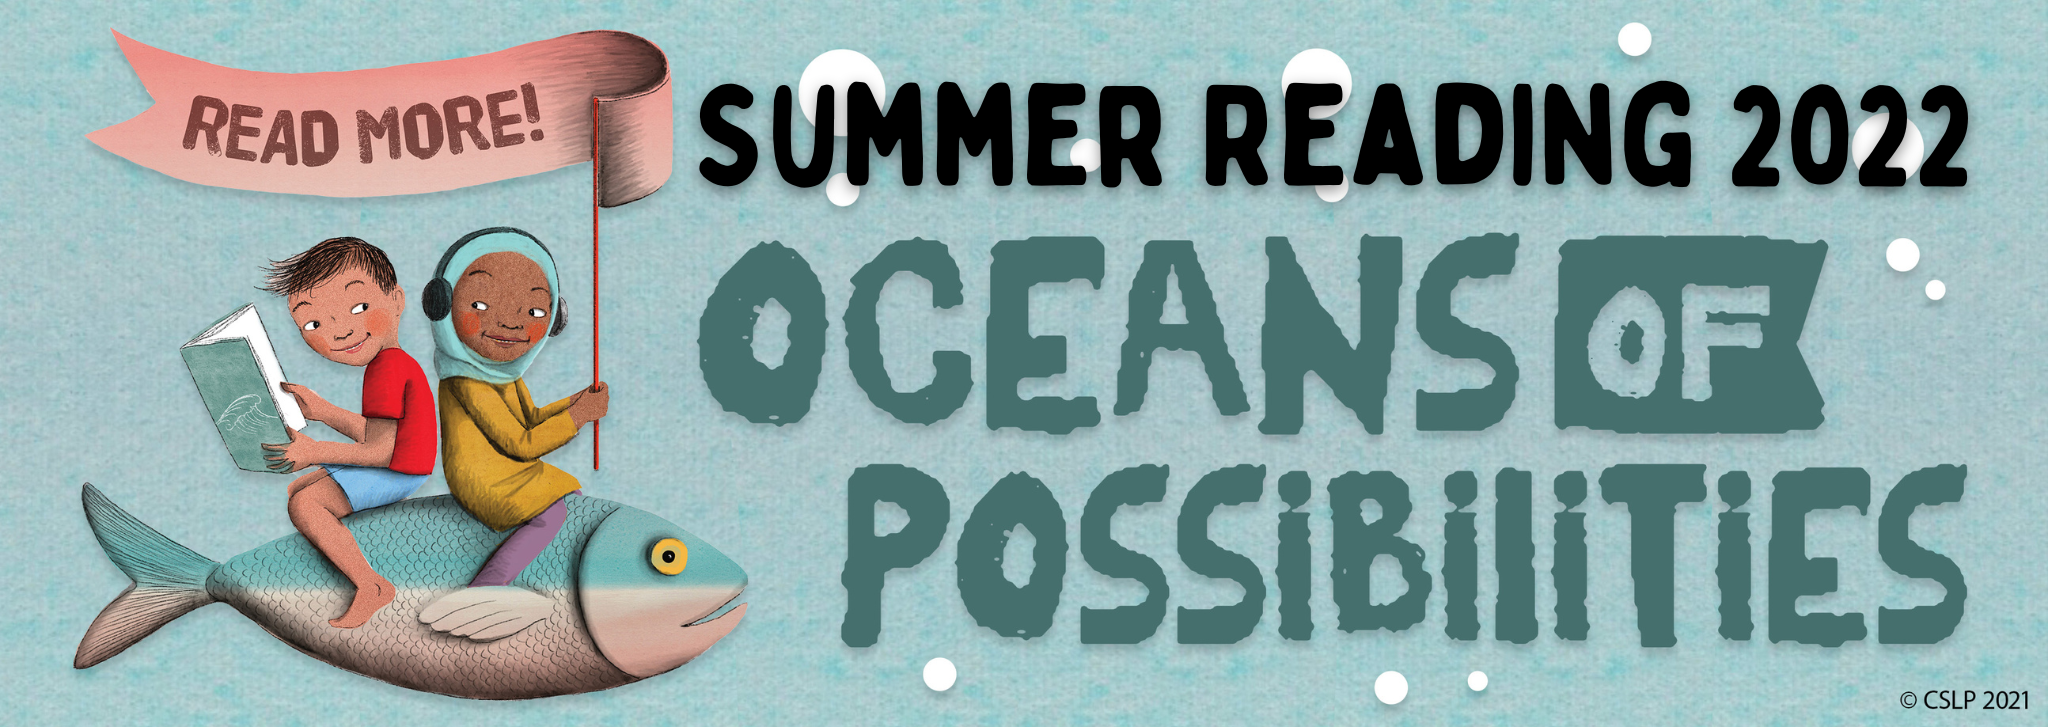 Read more. Summer Reading 2022. Oceans of possibilities.